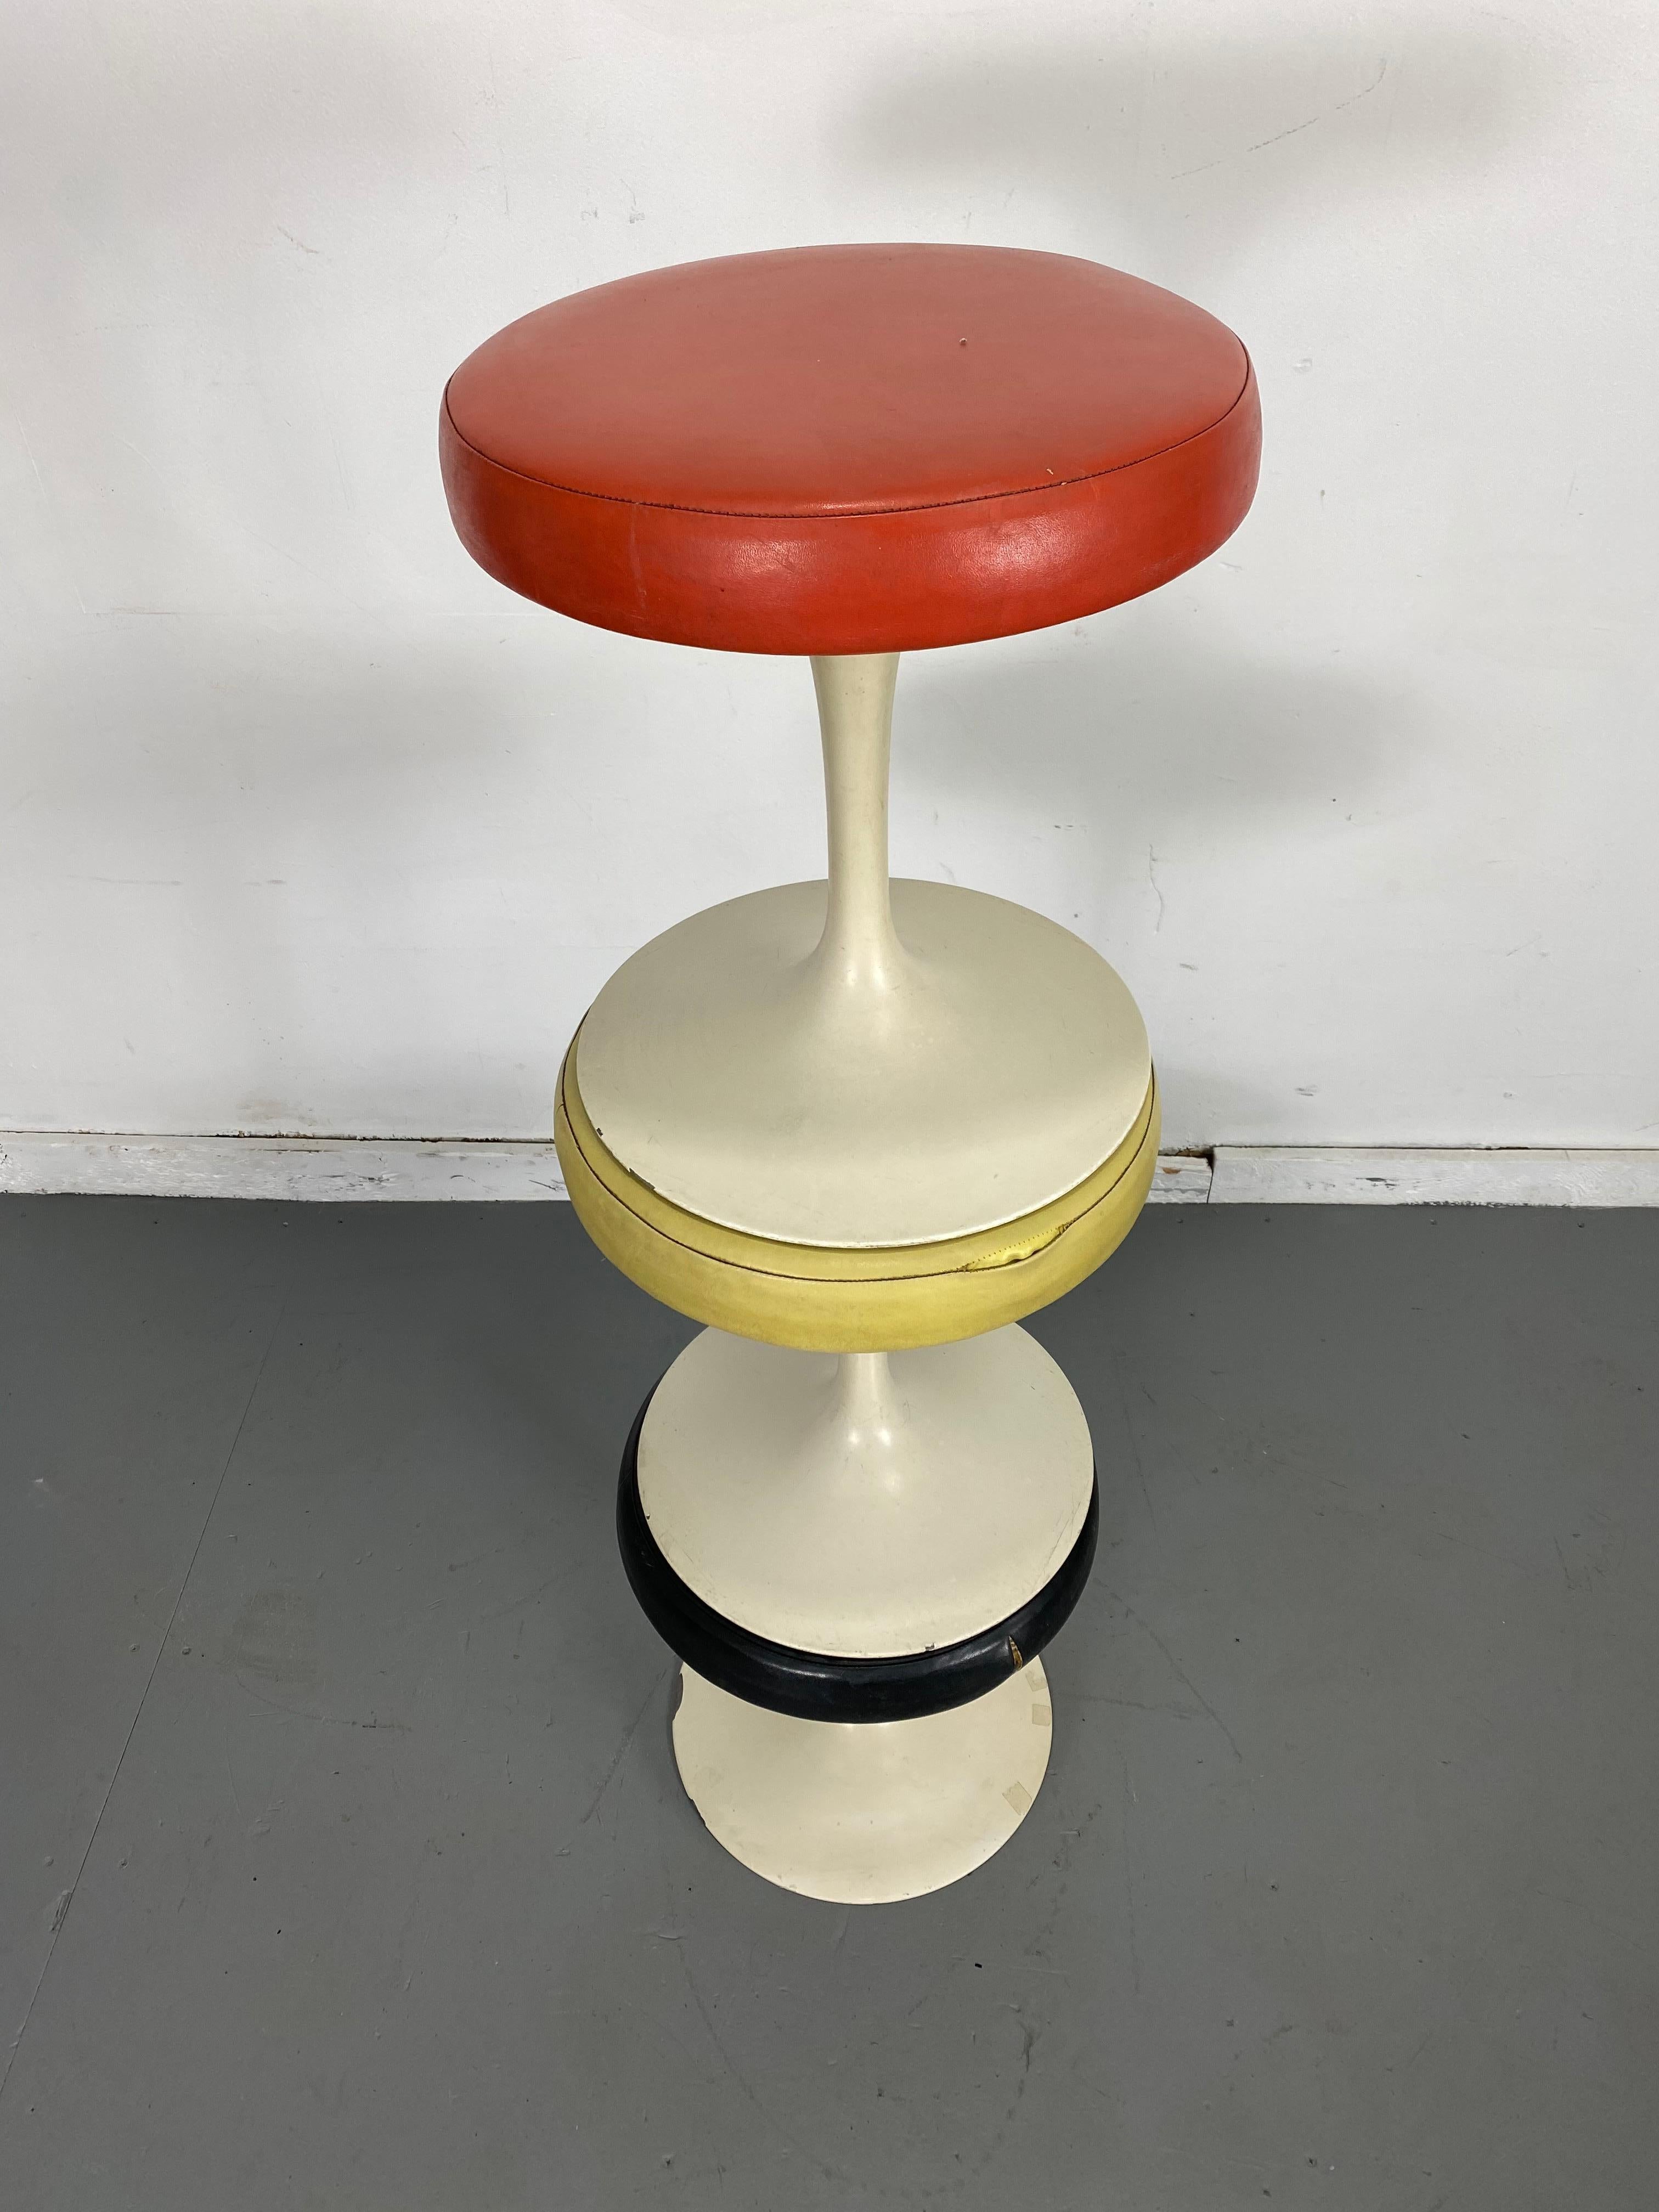 Set of 3 Early Knoll Associates Tulip Saarinen stools.... designed by Eero Saarinen for Knoll Associates, Madison Avenue, NYC. Early bow tie label. Retain Original upholstery., minor paint loss and tear to black stool, minor leather separation to